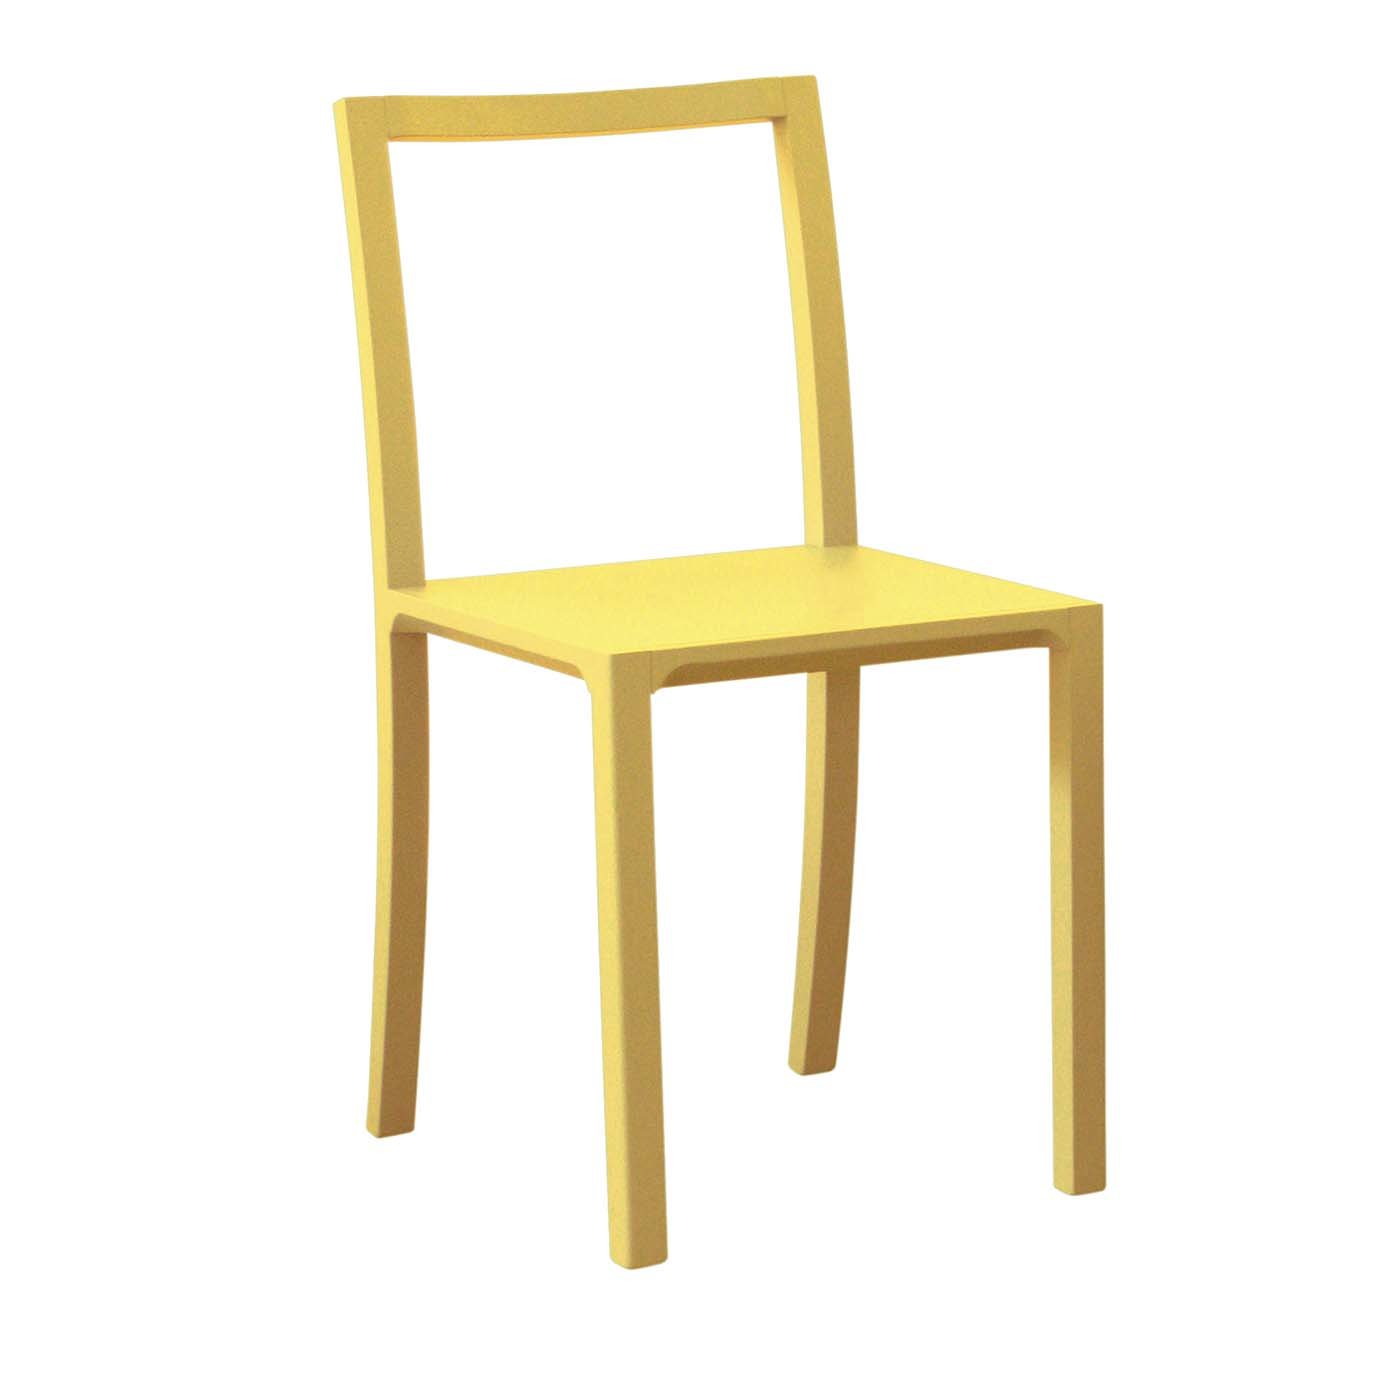 Framework Set of 2 Yellow Chairs by Steffen Kehrle - Main view